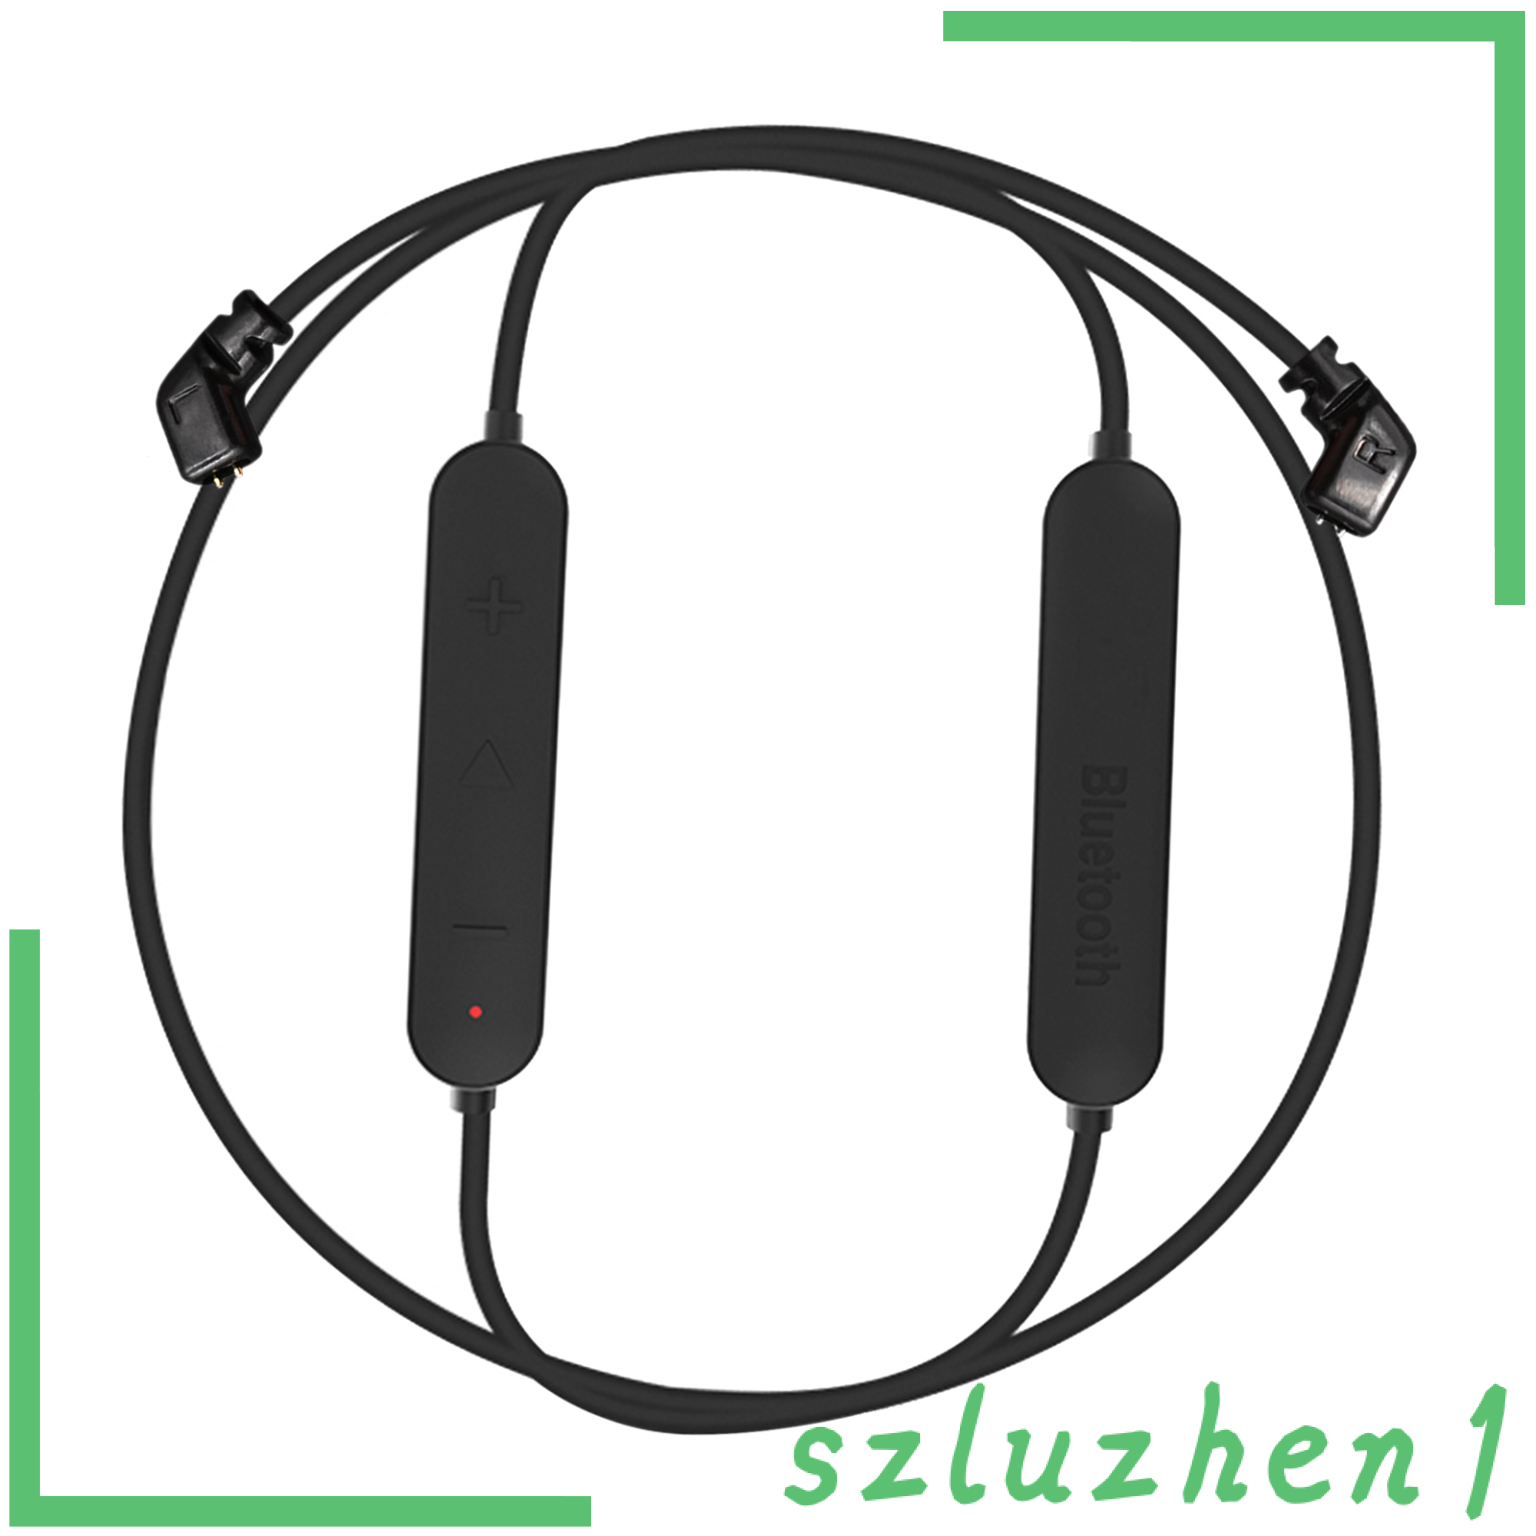 [Hi-tech] Bluetooth Module 4.2 Wireless Upgrade Cable Replaces for KZ